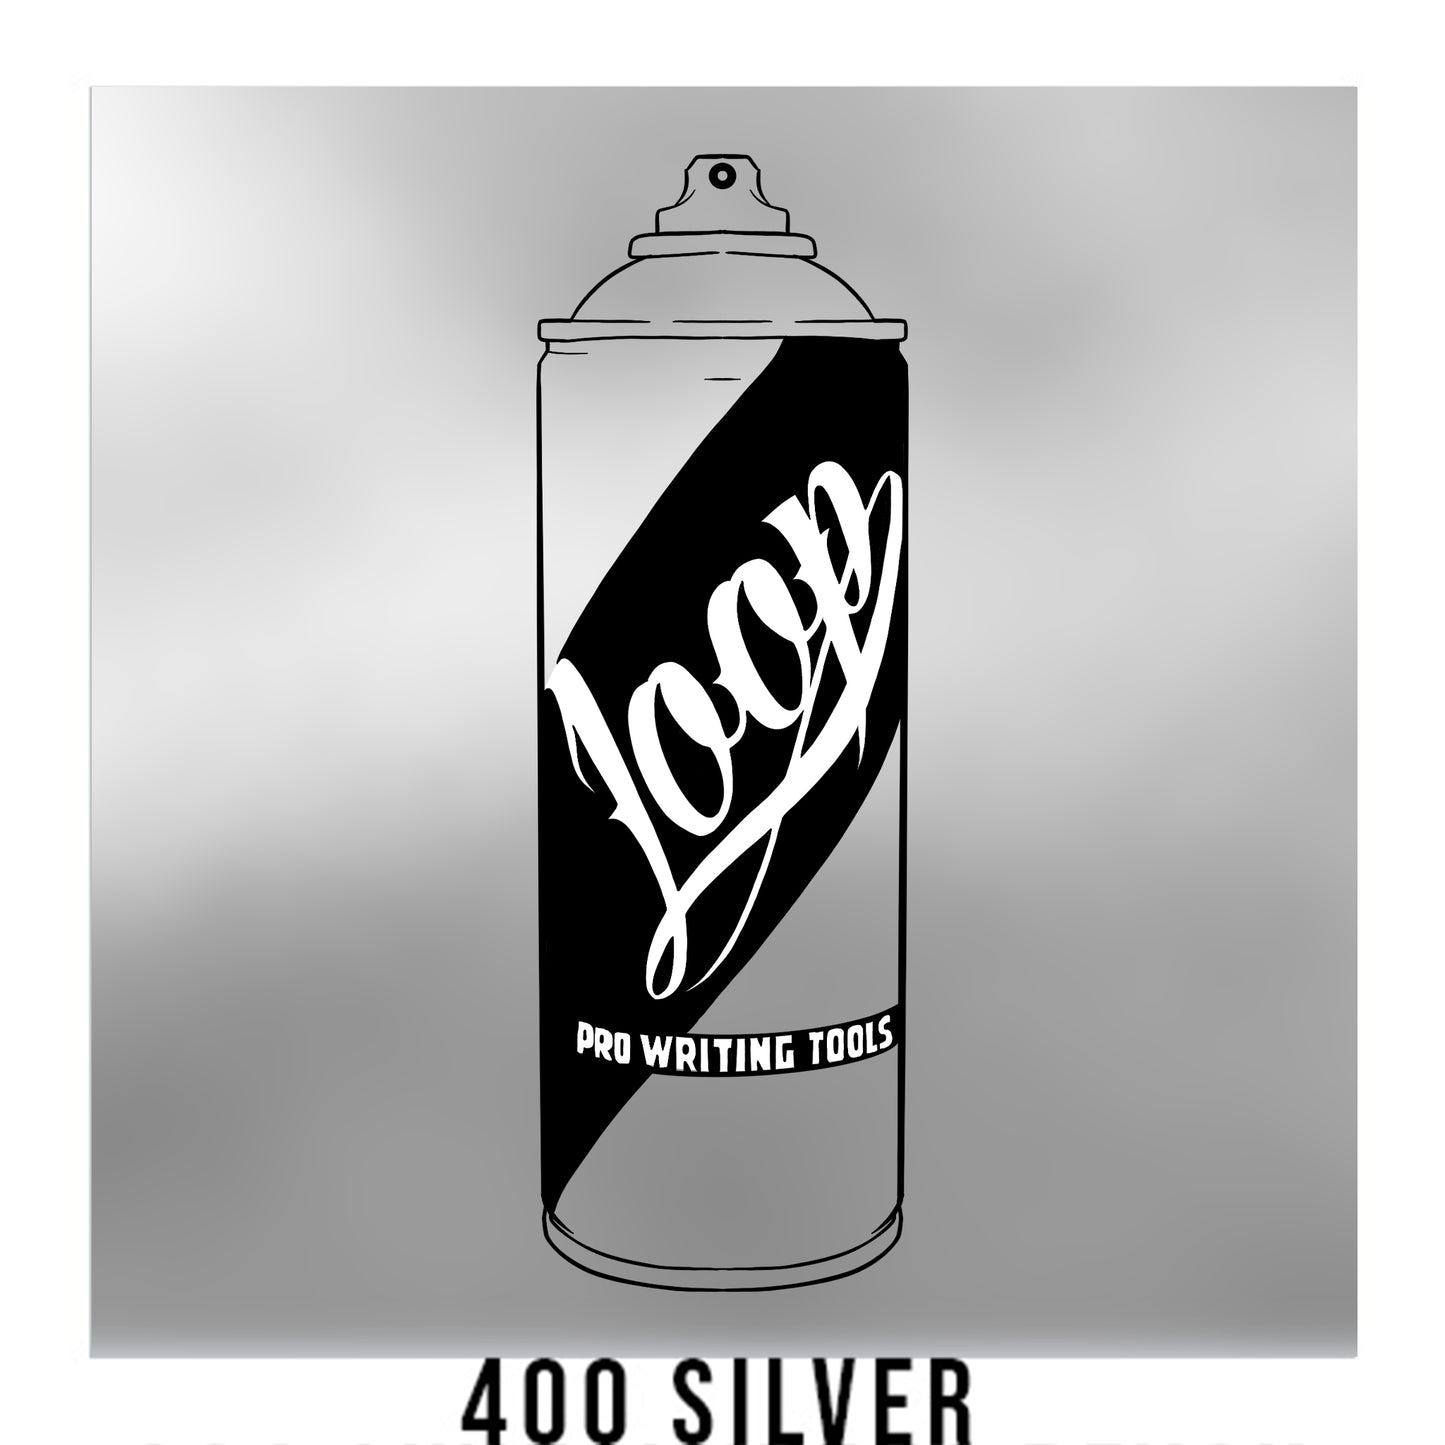 A black outline drawing of a silver  spray paint can with the word "Loop" written on the face in script. The background is a color swatch of the same silver with a white border with the words "400 silver" at the bottom.